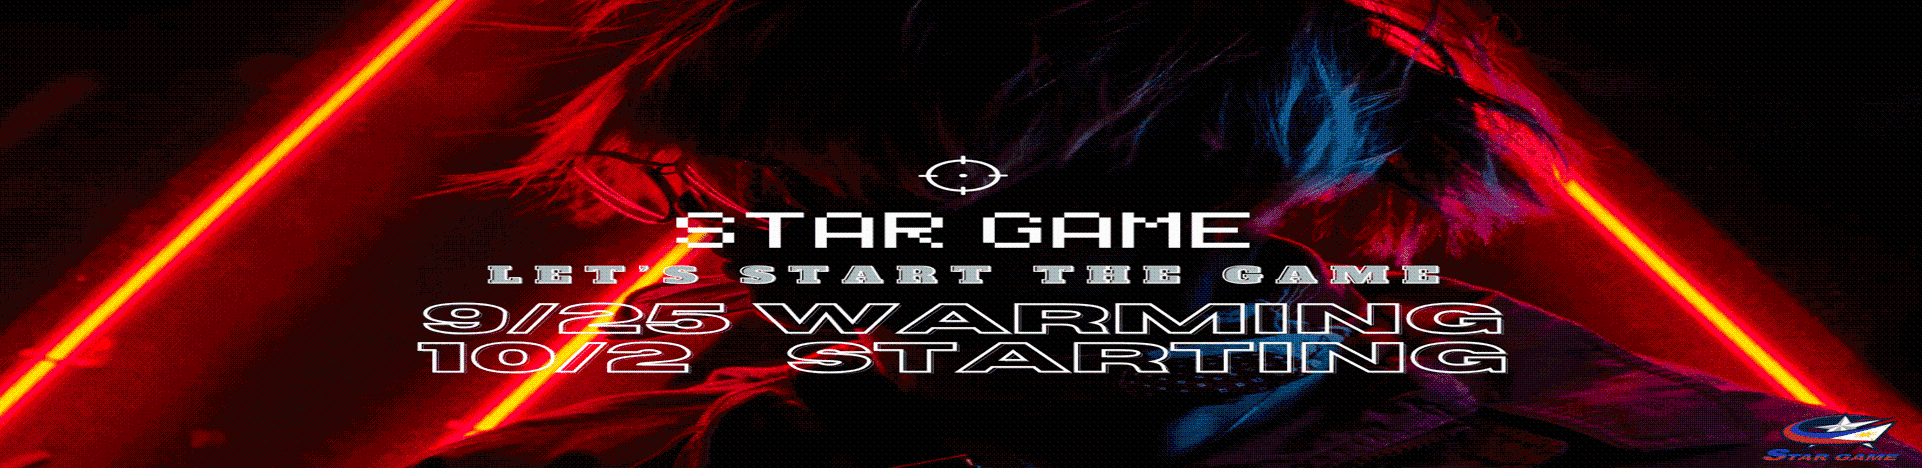 star game_opening_banner